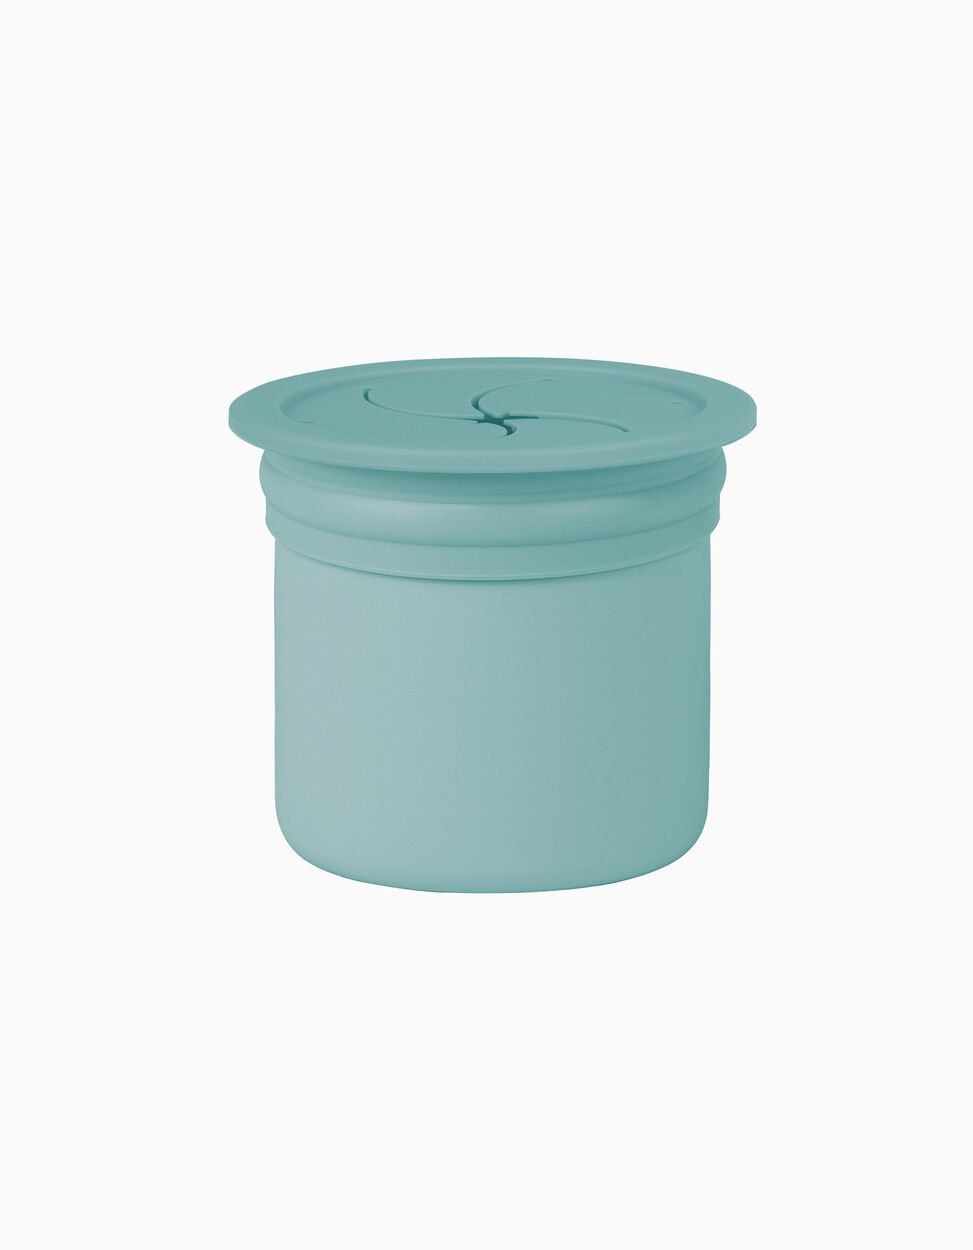 Snack Cup with Straw Green/Grey Minikoioi 6M+